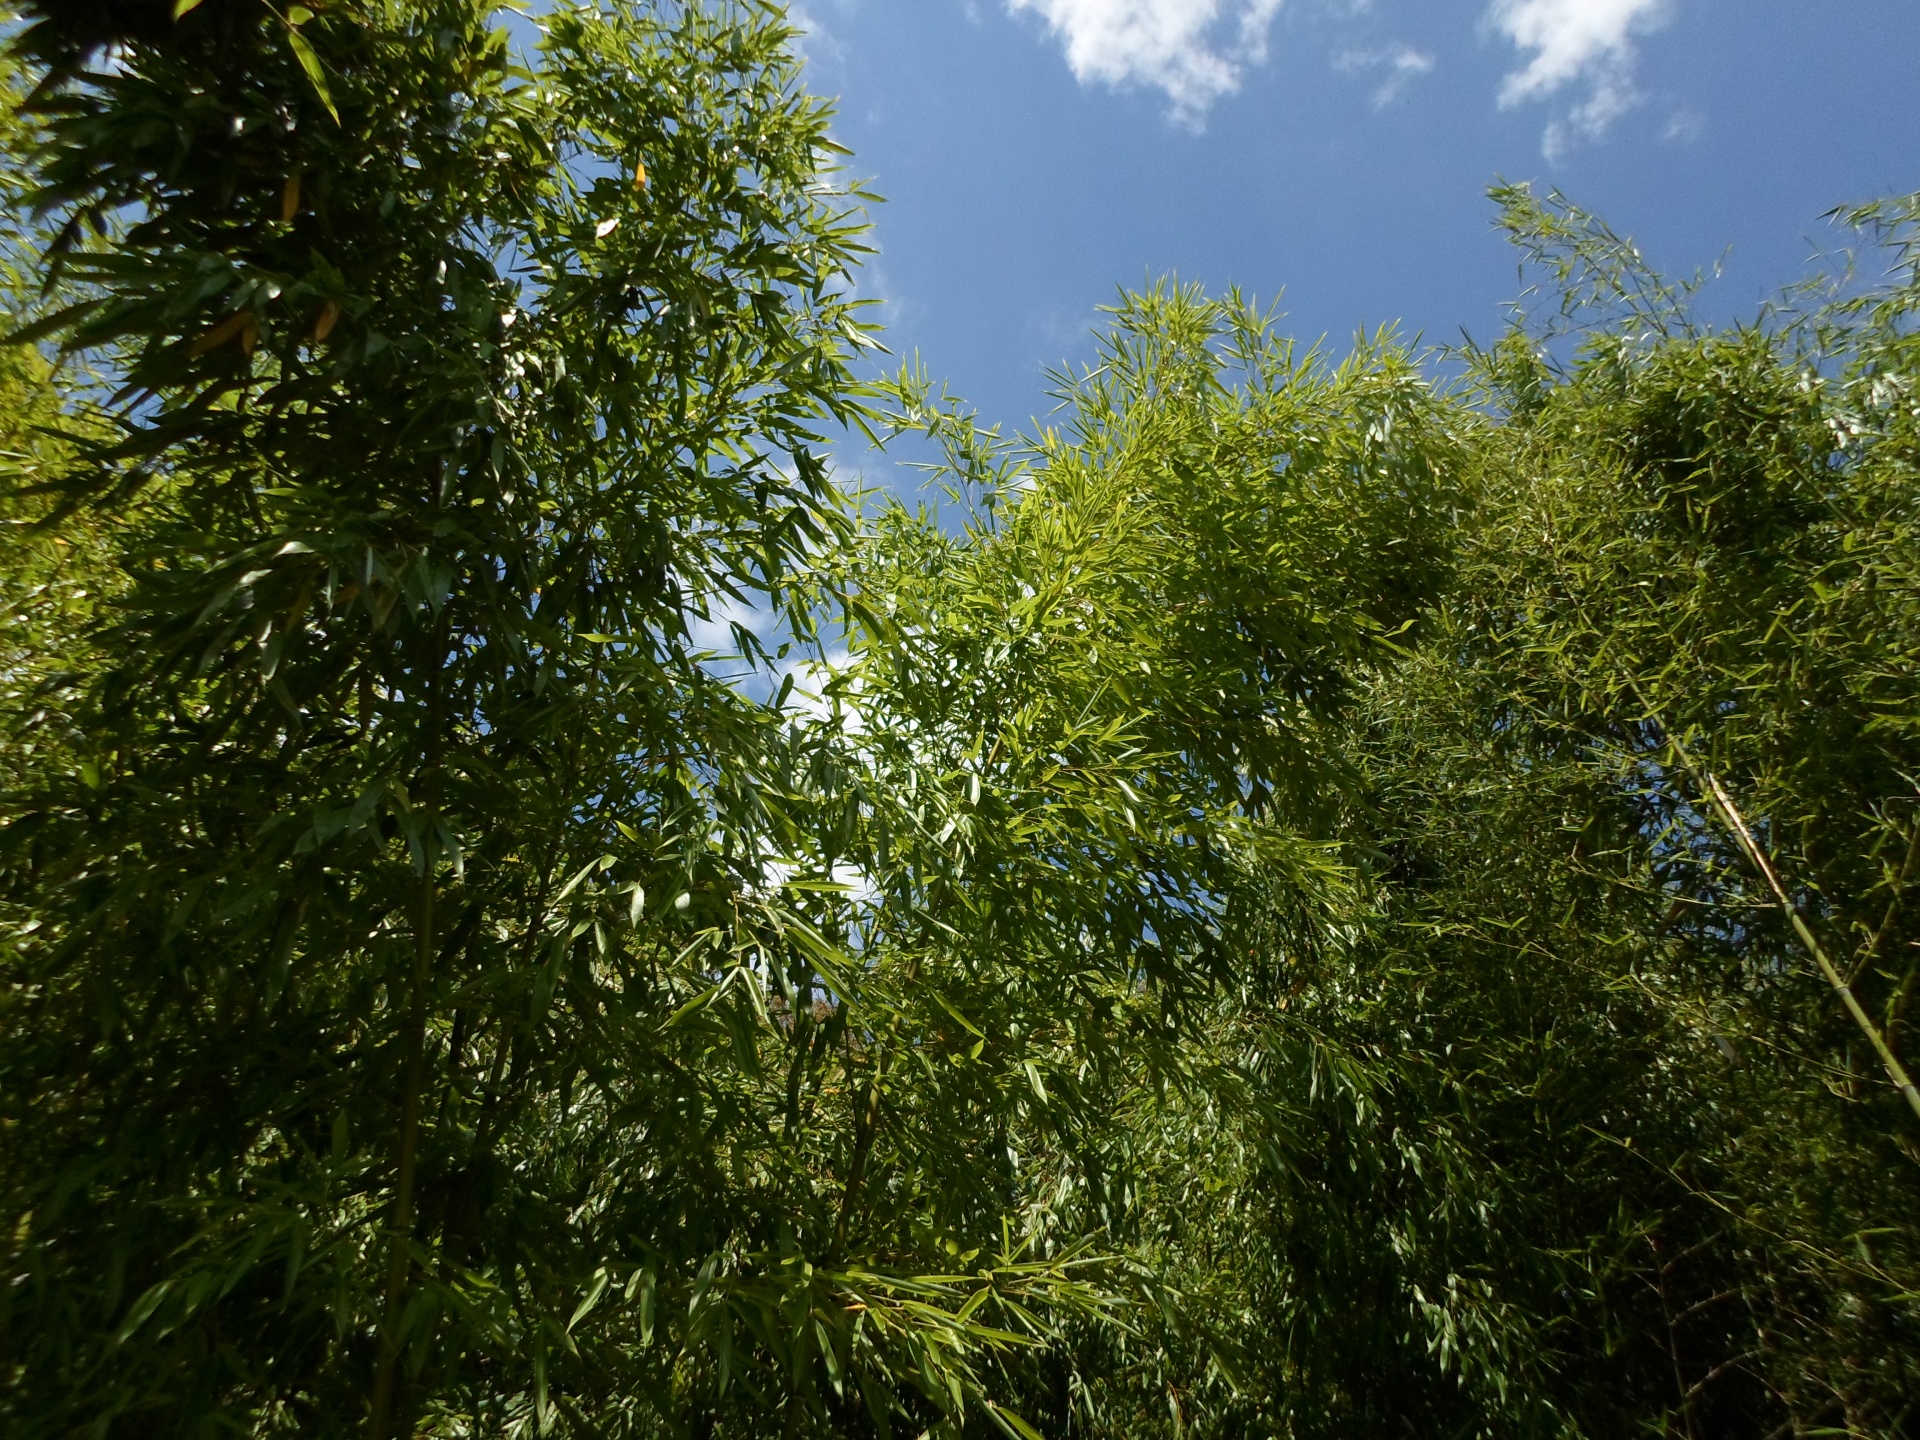 Bamboo Thatched Green Foliage